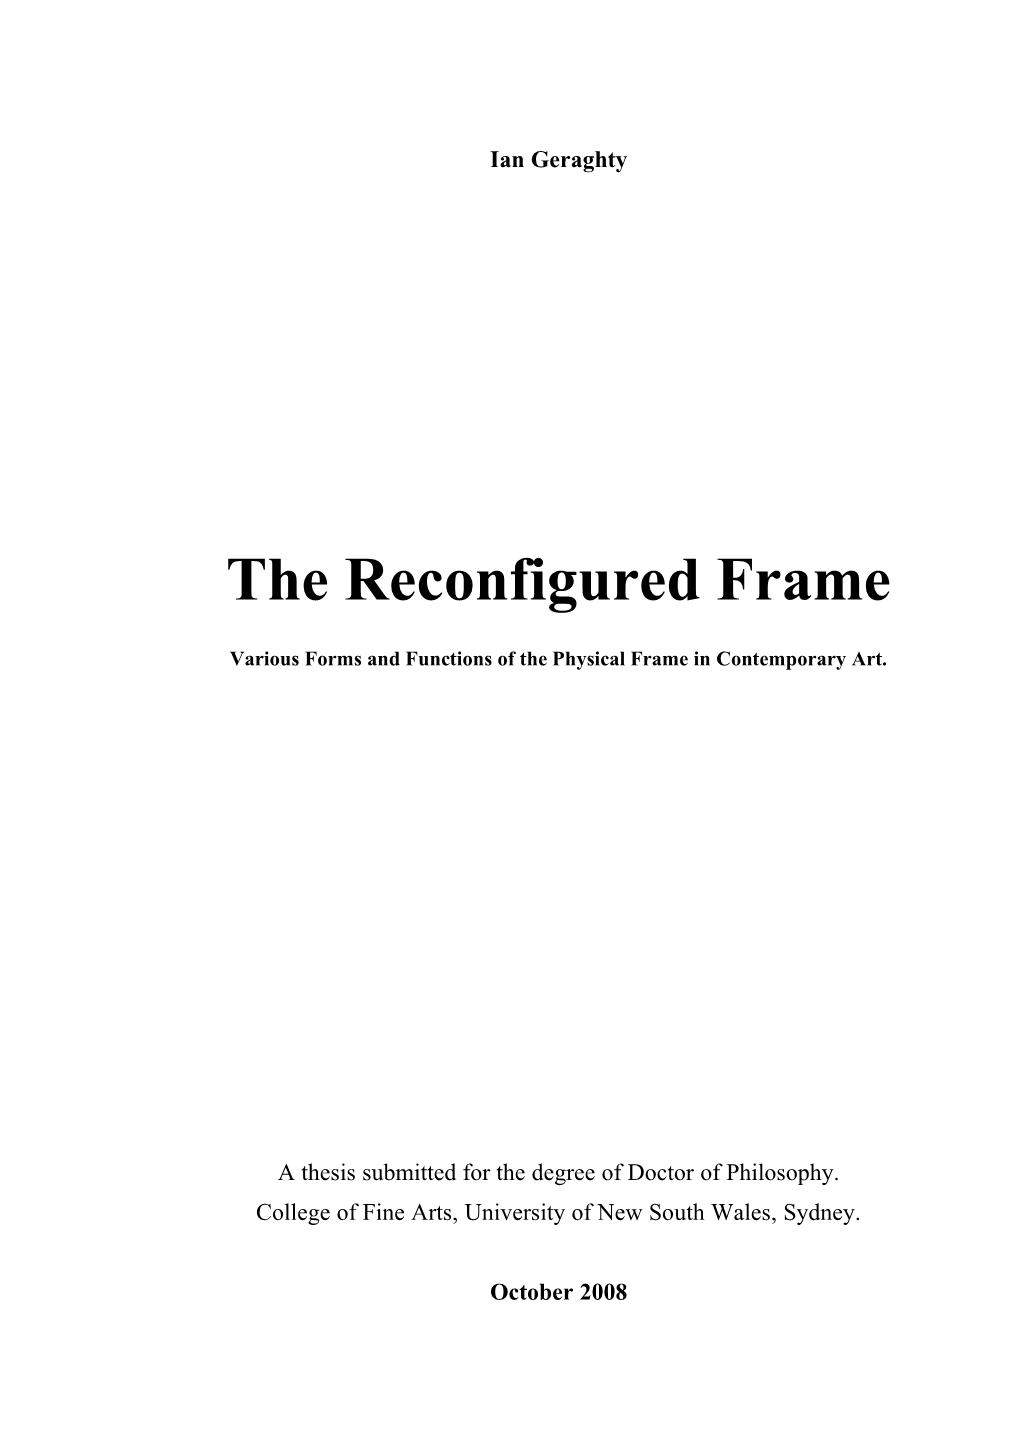 The Reconfigured Frame